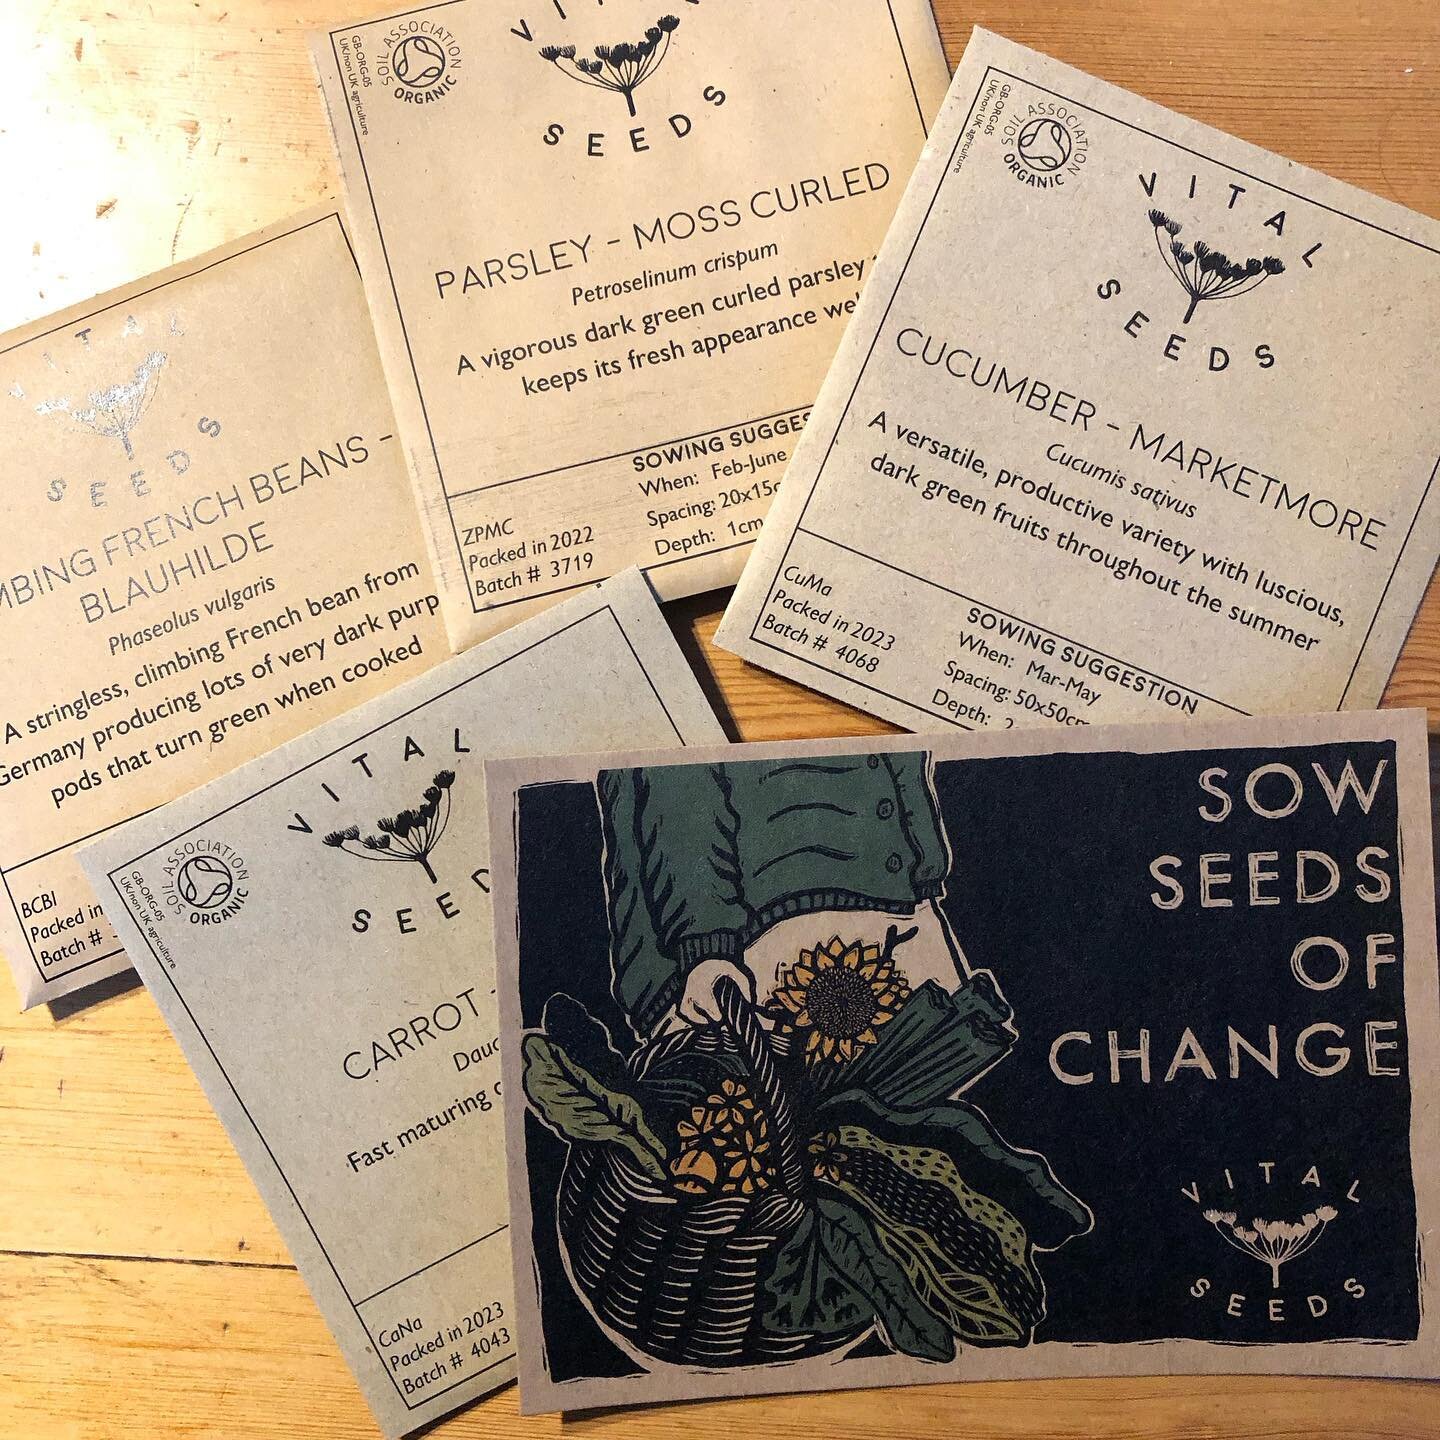 Stocked up with a few packets of potential from our neighbours at @vital.seeds . It&rsquo;s time to get growing.

________________________
#growing #seeds #localseeds #organic #permaculture